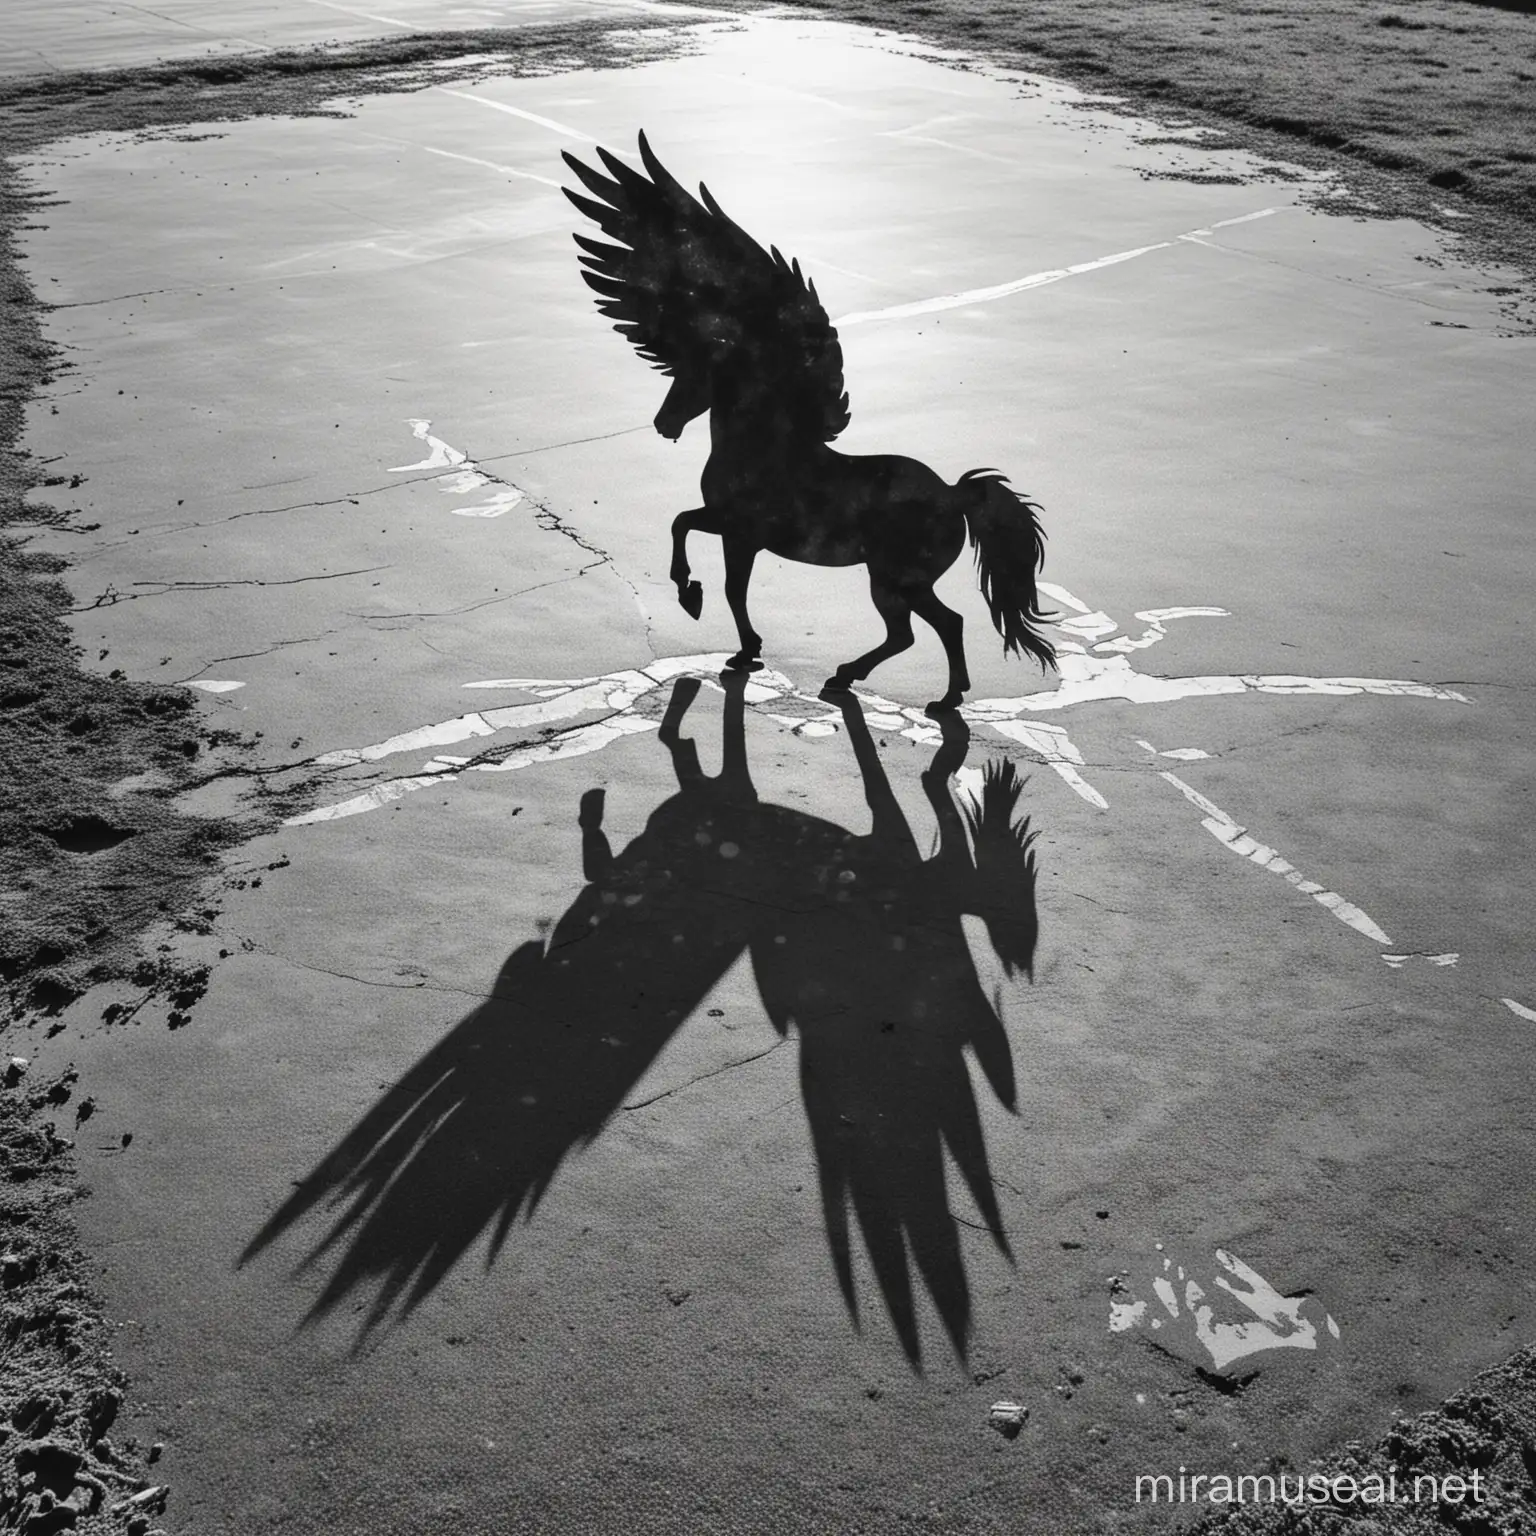 shadow of the icon of a pegasus drawn on the ground in the foreground. Half-zenith view. watercolor. black and white. sunset. --no text. --ar 3:5.